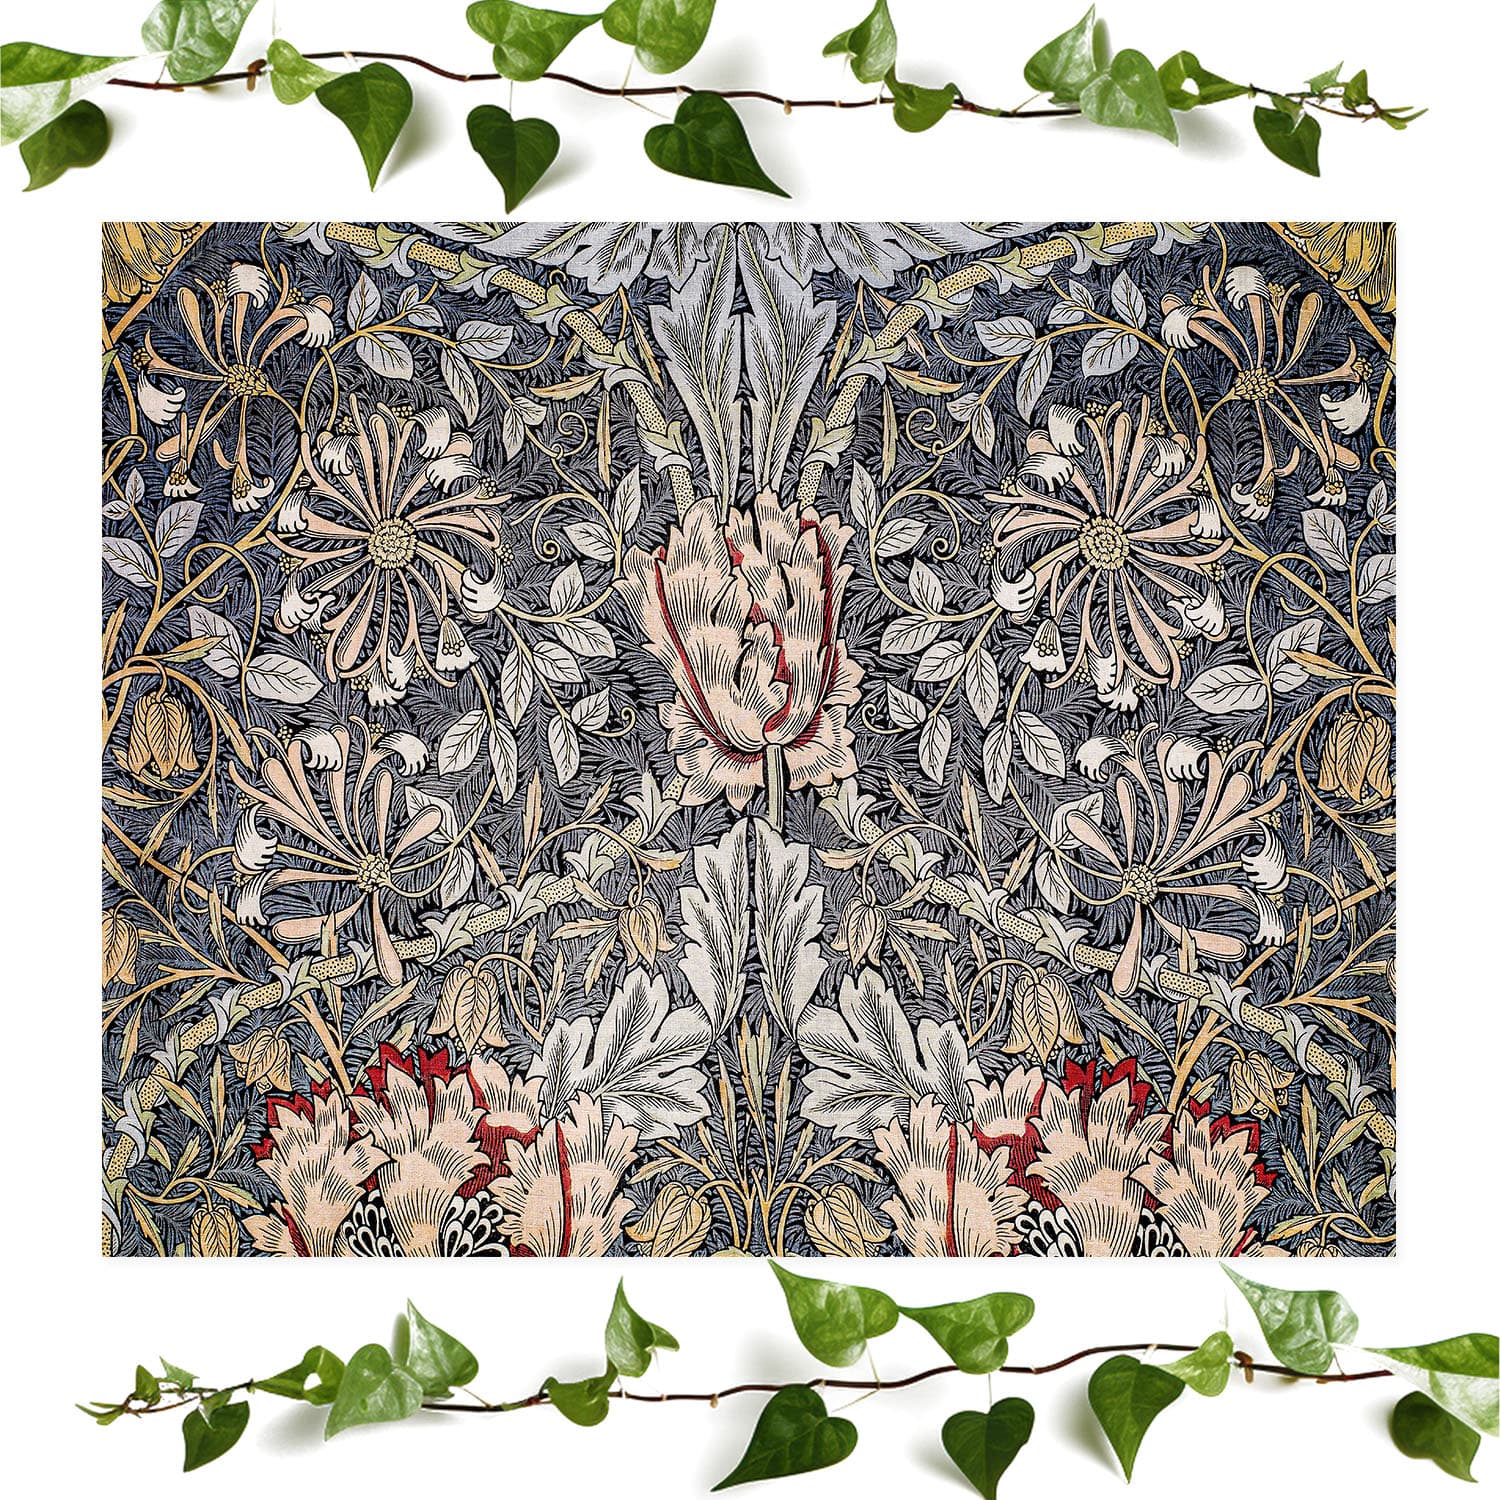 Vintage wallpaper art print featuring honeysuckle, perfect for antique wall decor.